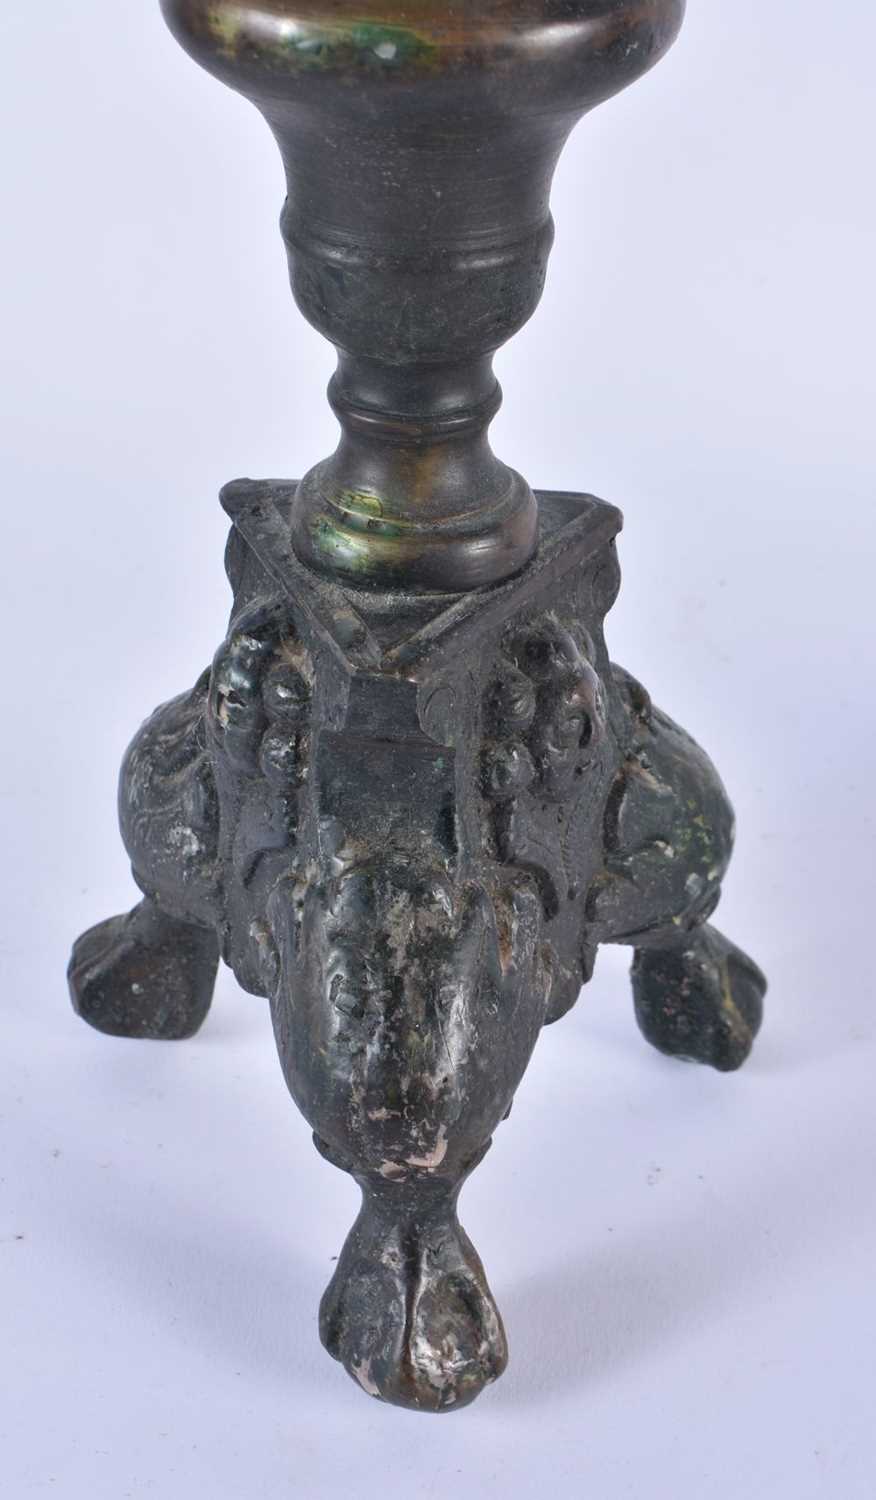 A LARGE PAIR OF 18TH CENTURY DUTCH BRONZE PRICKET CANDLESTICKS. 48 cm high. - Image 7 of 7